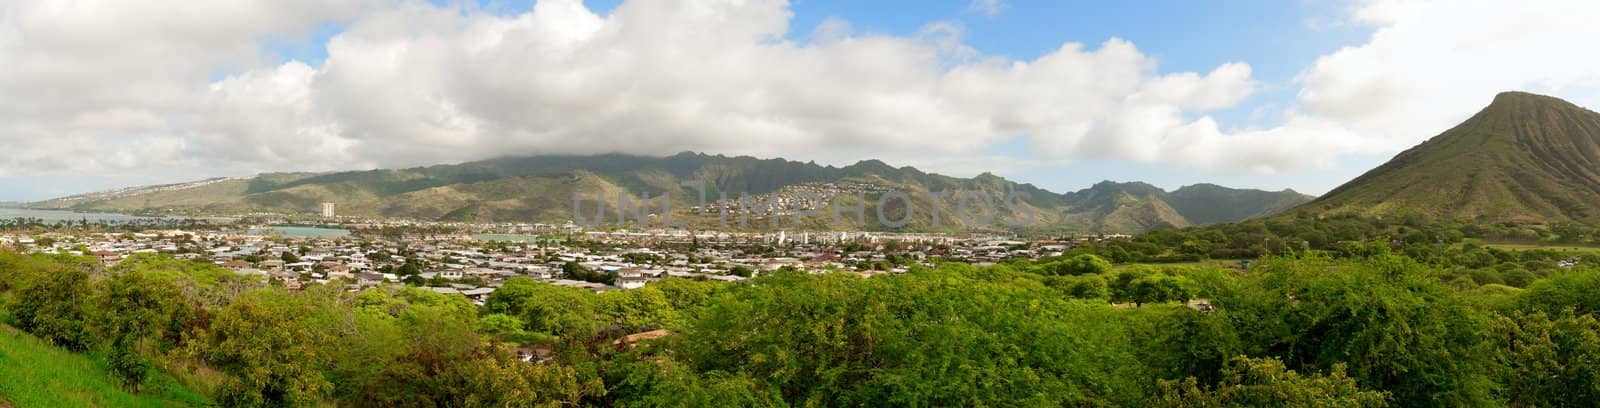 Panorama of the Island of Oahu by pixelsnap